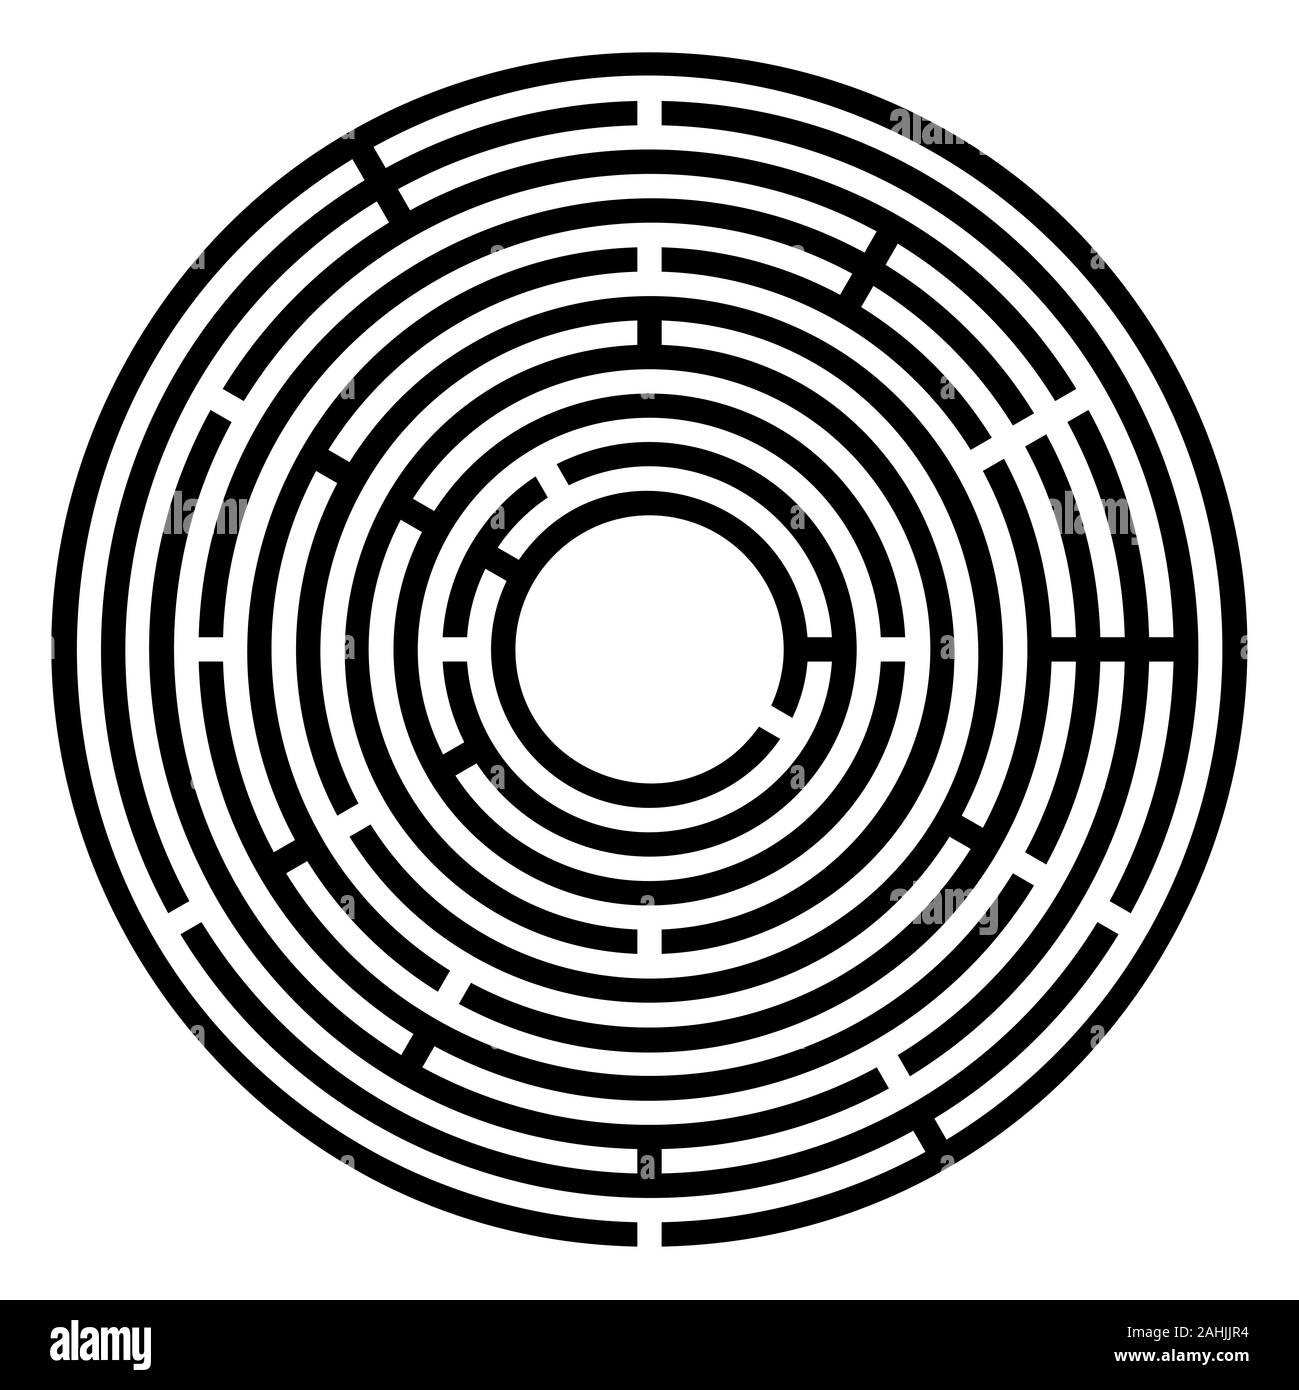 Black circular maze. Radial labyrinth. Find a route to the centre. Print out and follow the path by a pencil or fingertip. Collection of paths. Stock Photo